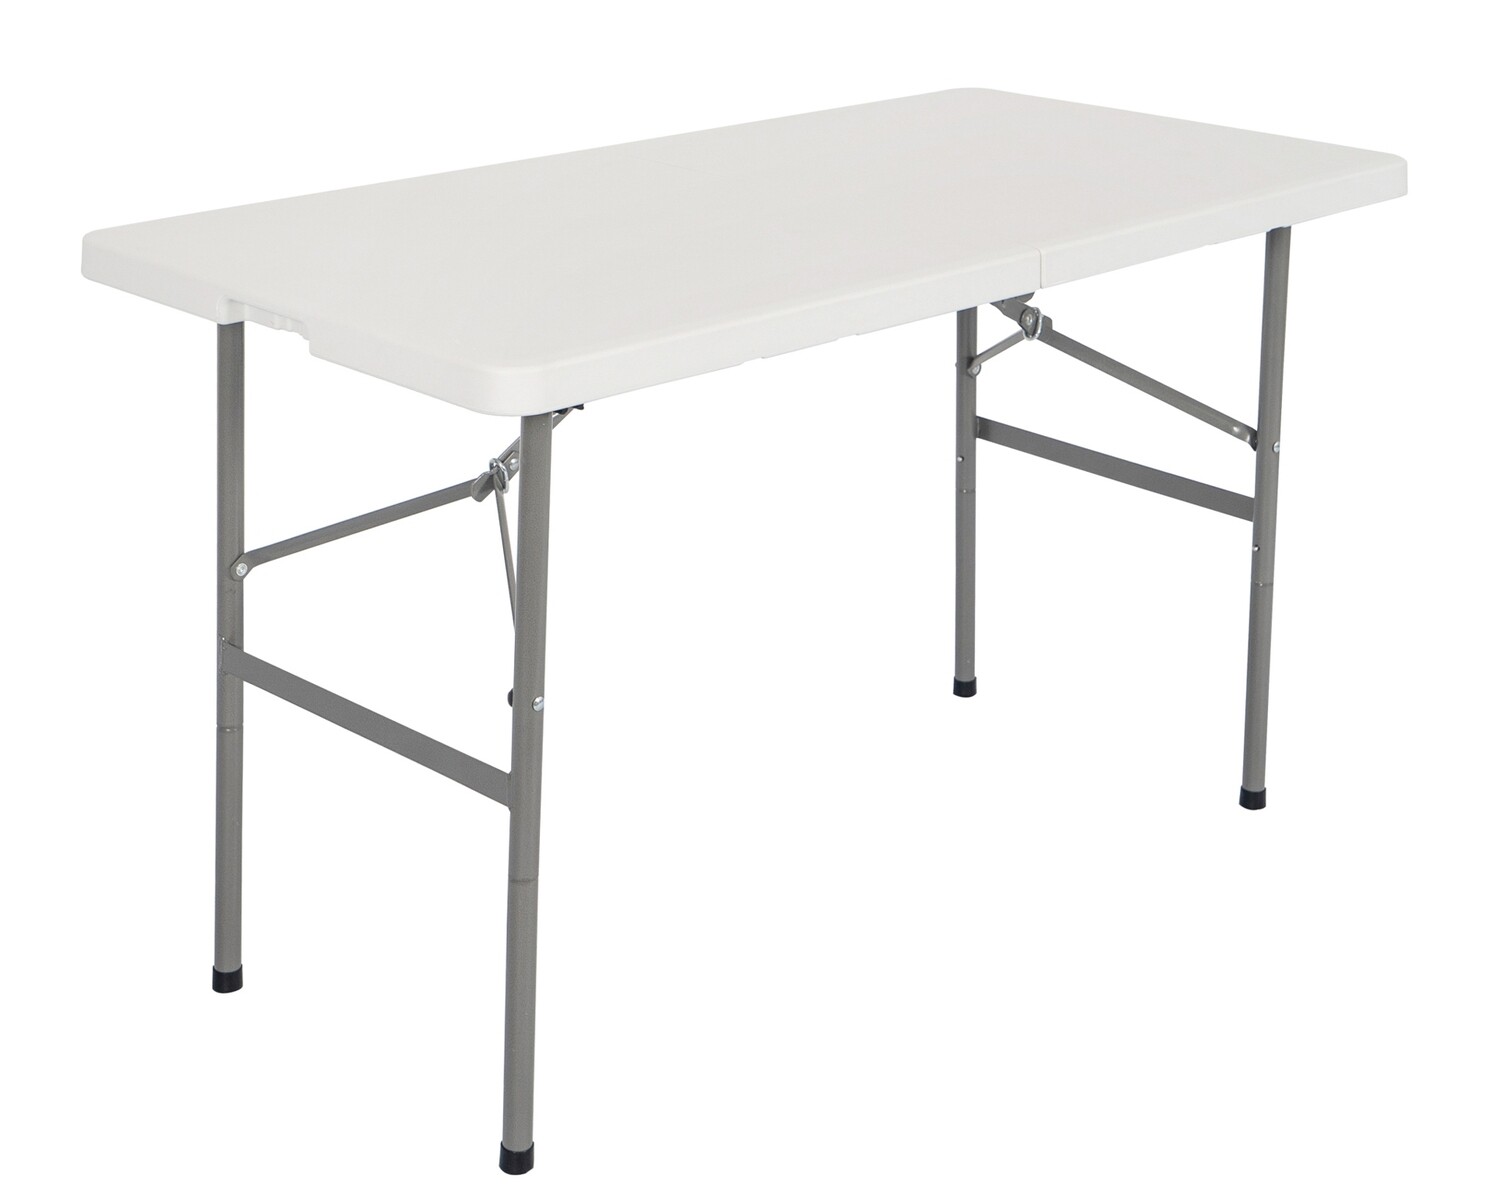 Ofix 4FT Folding in Half Table (122*60*74) (White)